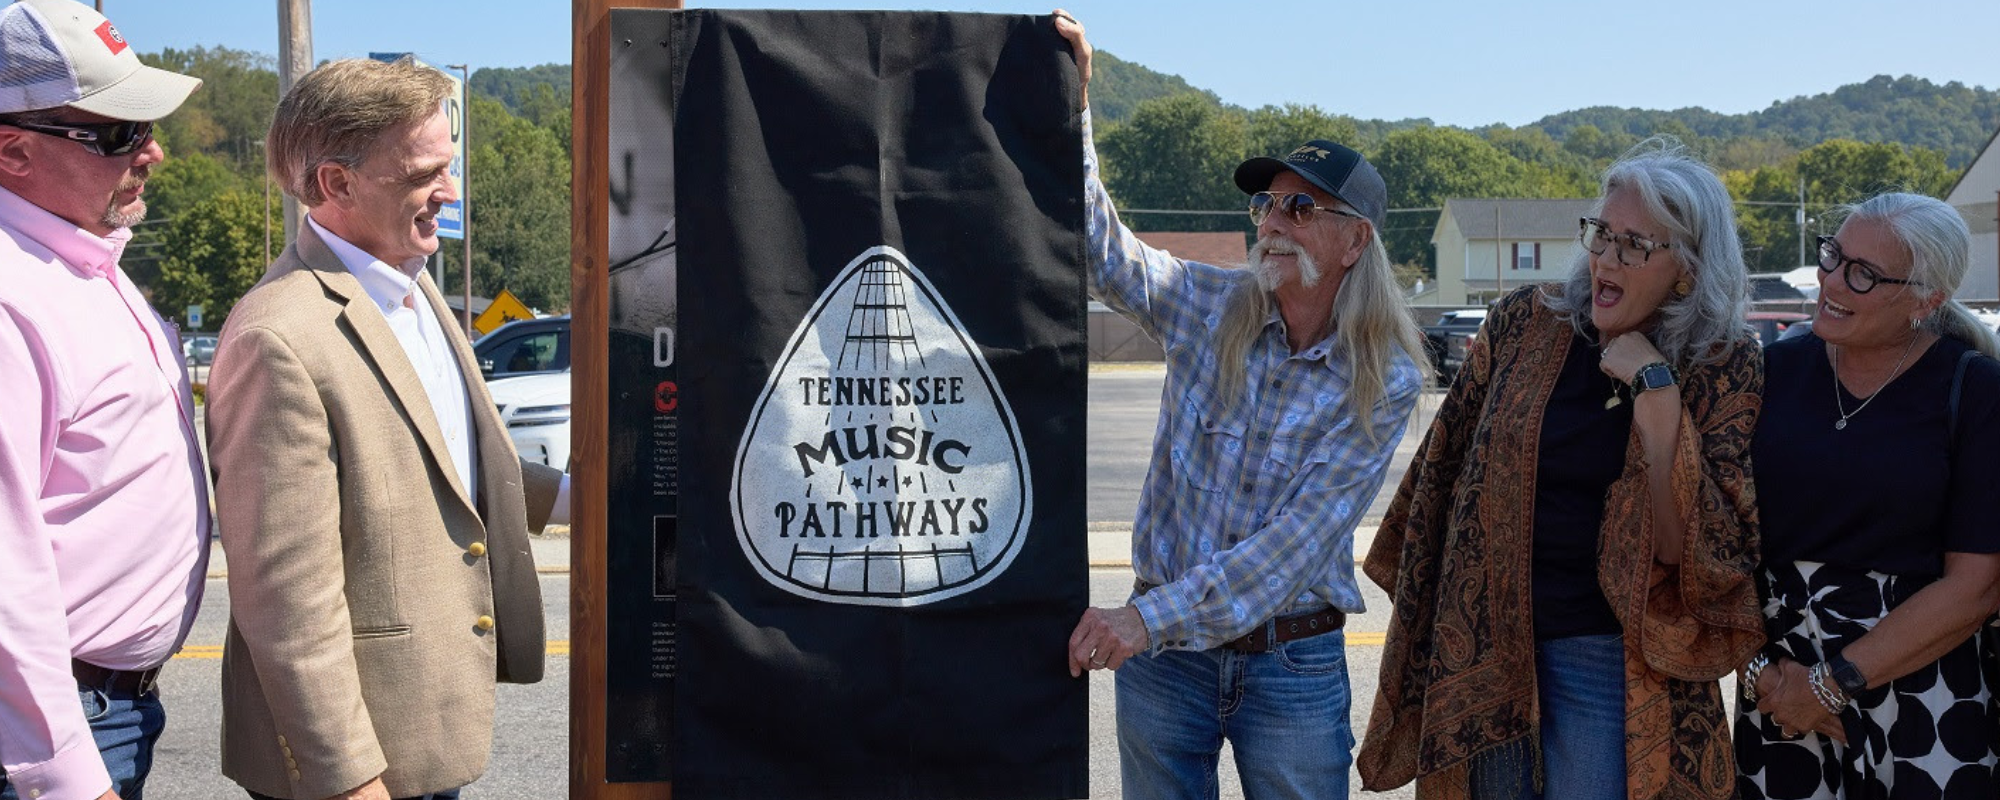 Dean Dillon Honored with Tennessee Music Pathways Marker in Hometown